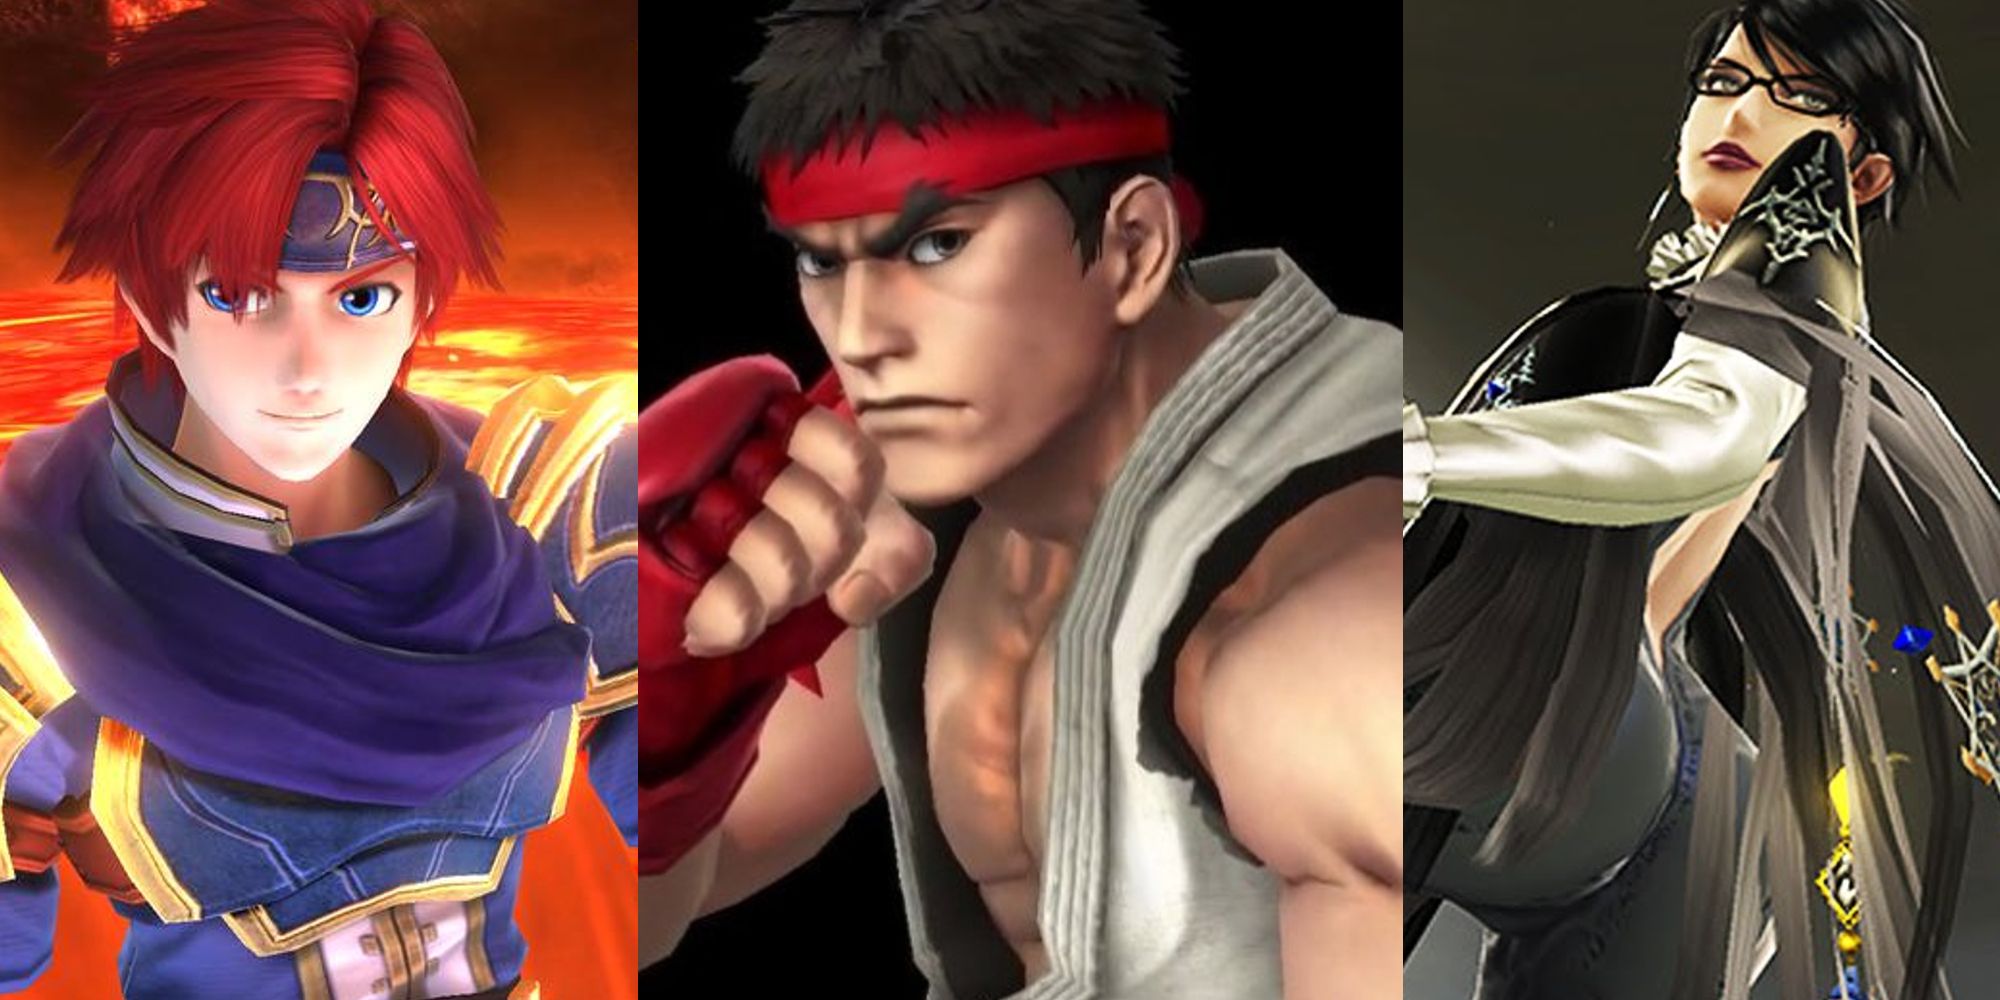 Roy in SSB4 gameplay; Ryu facing the screen in his reveal trailer; Bayonetta looking behind her in SSB4 gameplay